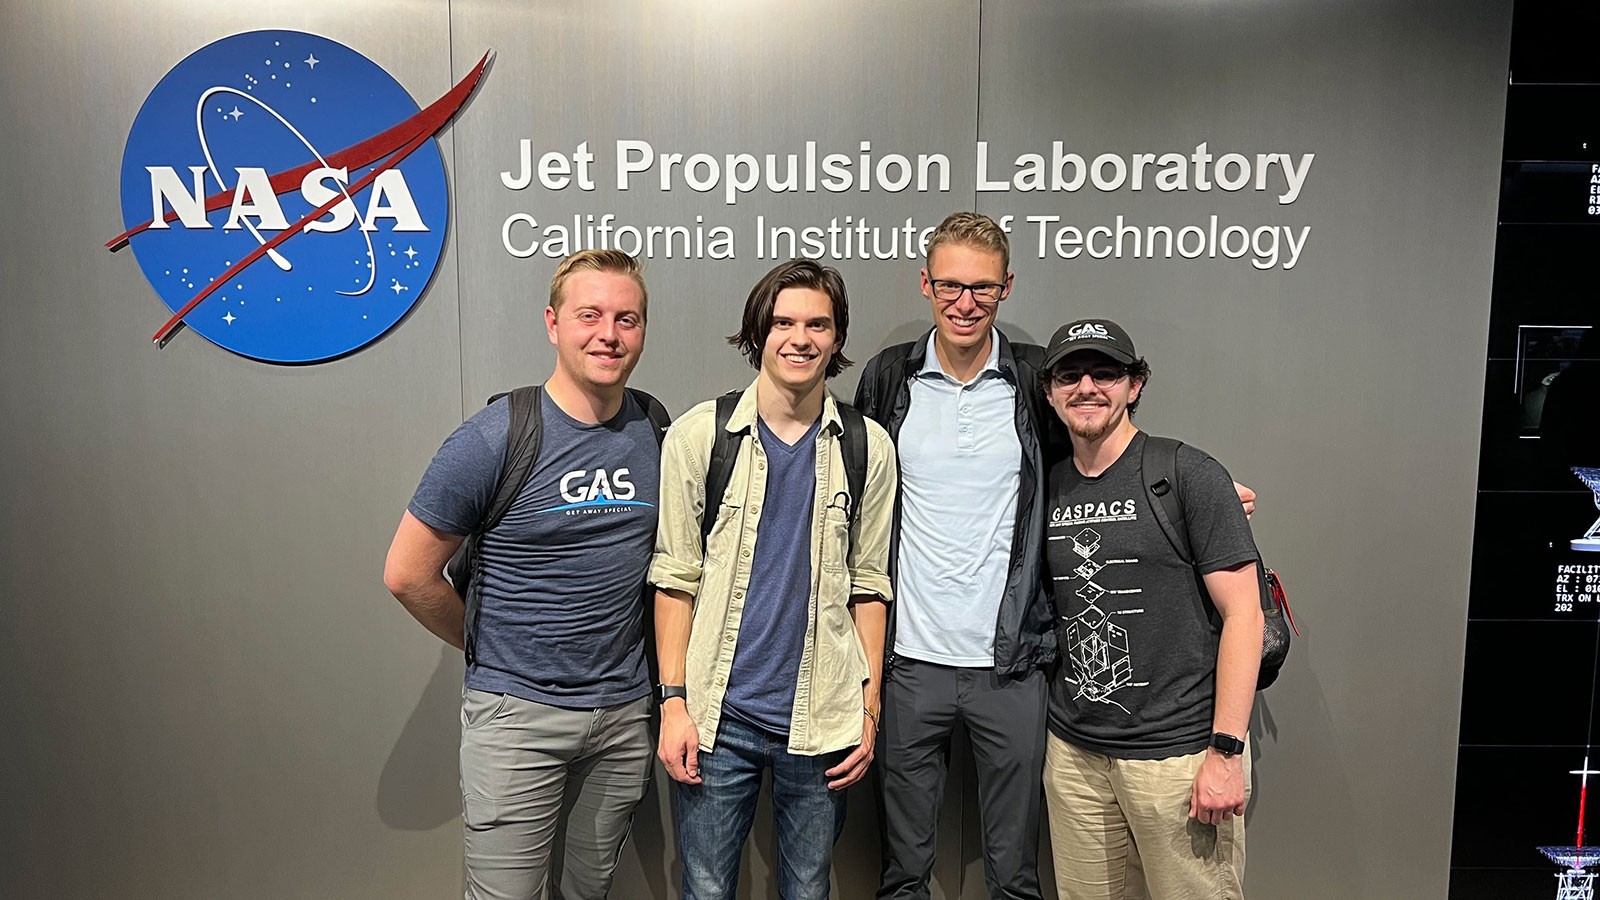 USU's GAS Student Space Research Team Visits NASA Jet Propulsion Laboratory